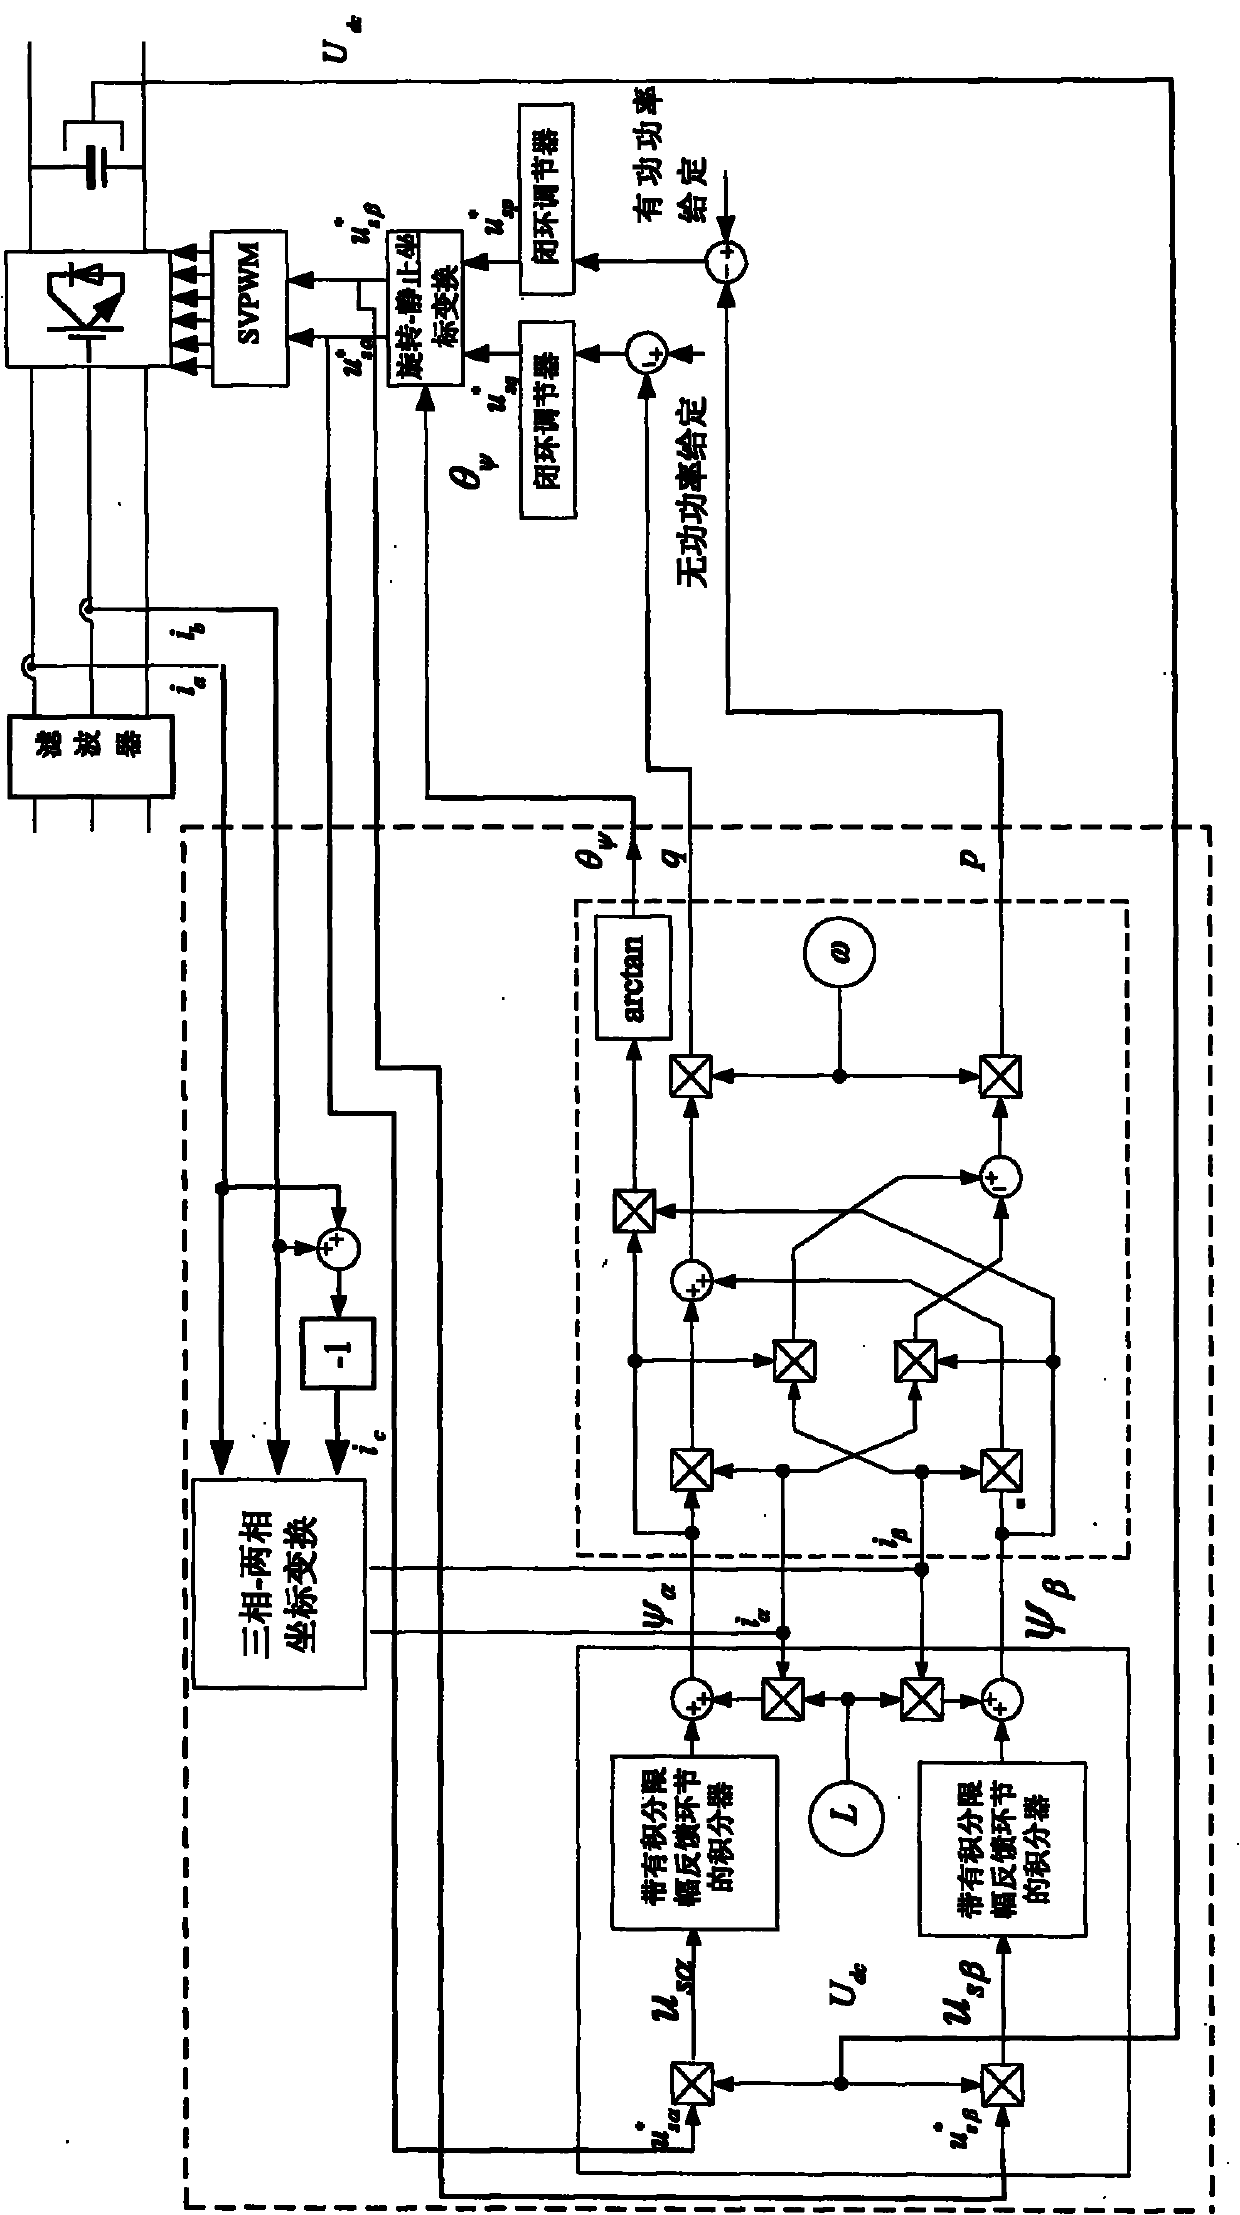 Method for controlling direct power of grid-connected inverter without non-AC voltage sensor